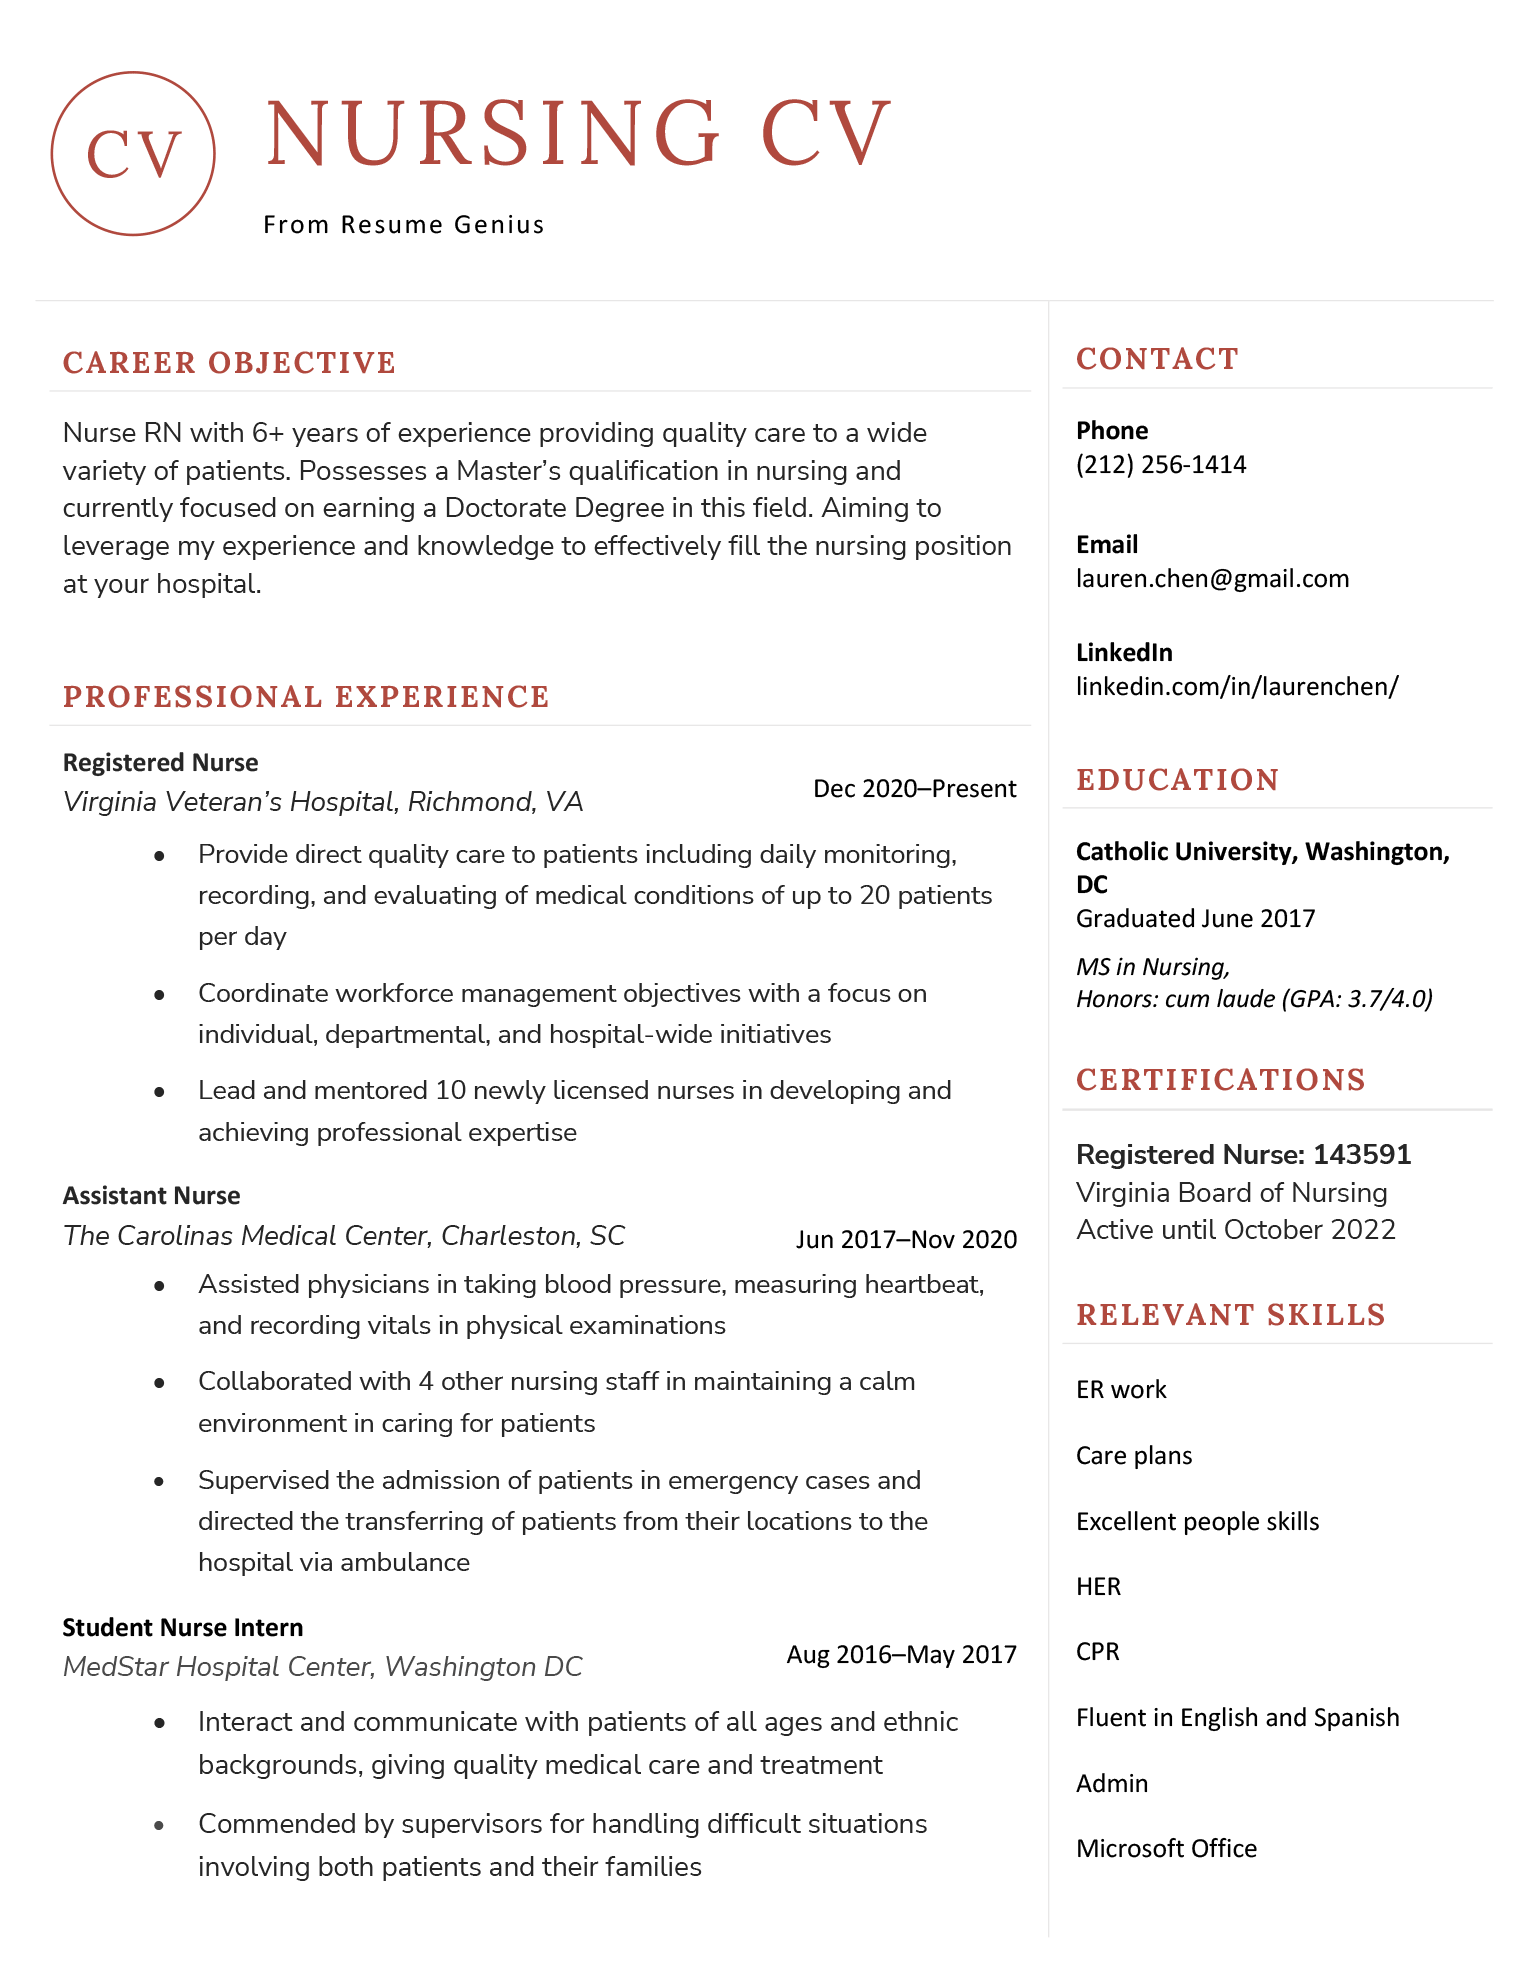 Example of a Nursing CV, with certifications section and clean, sleek design